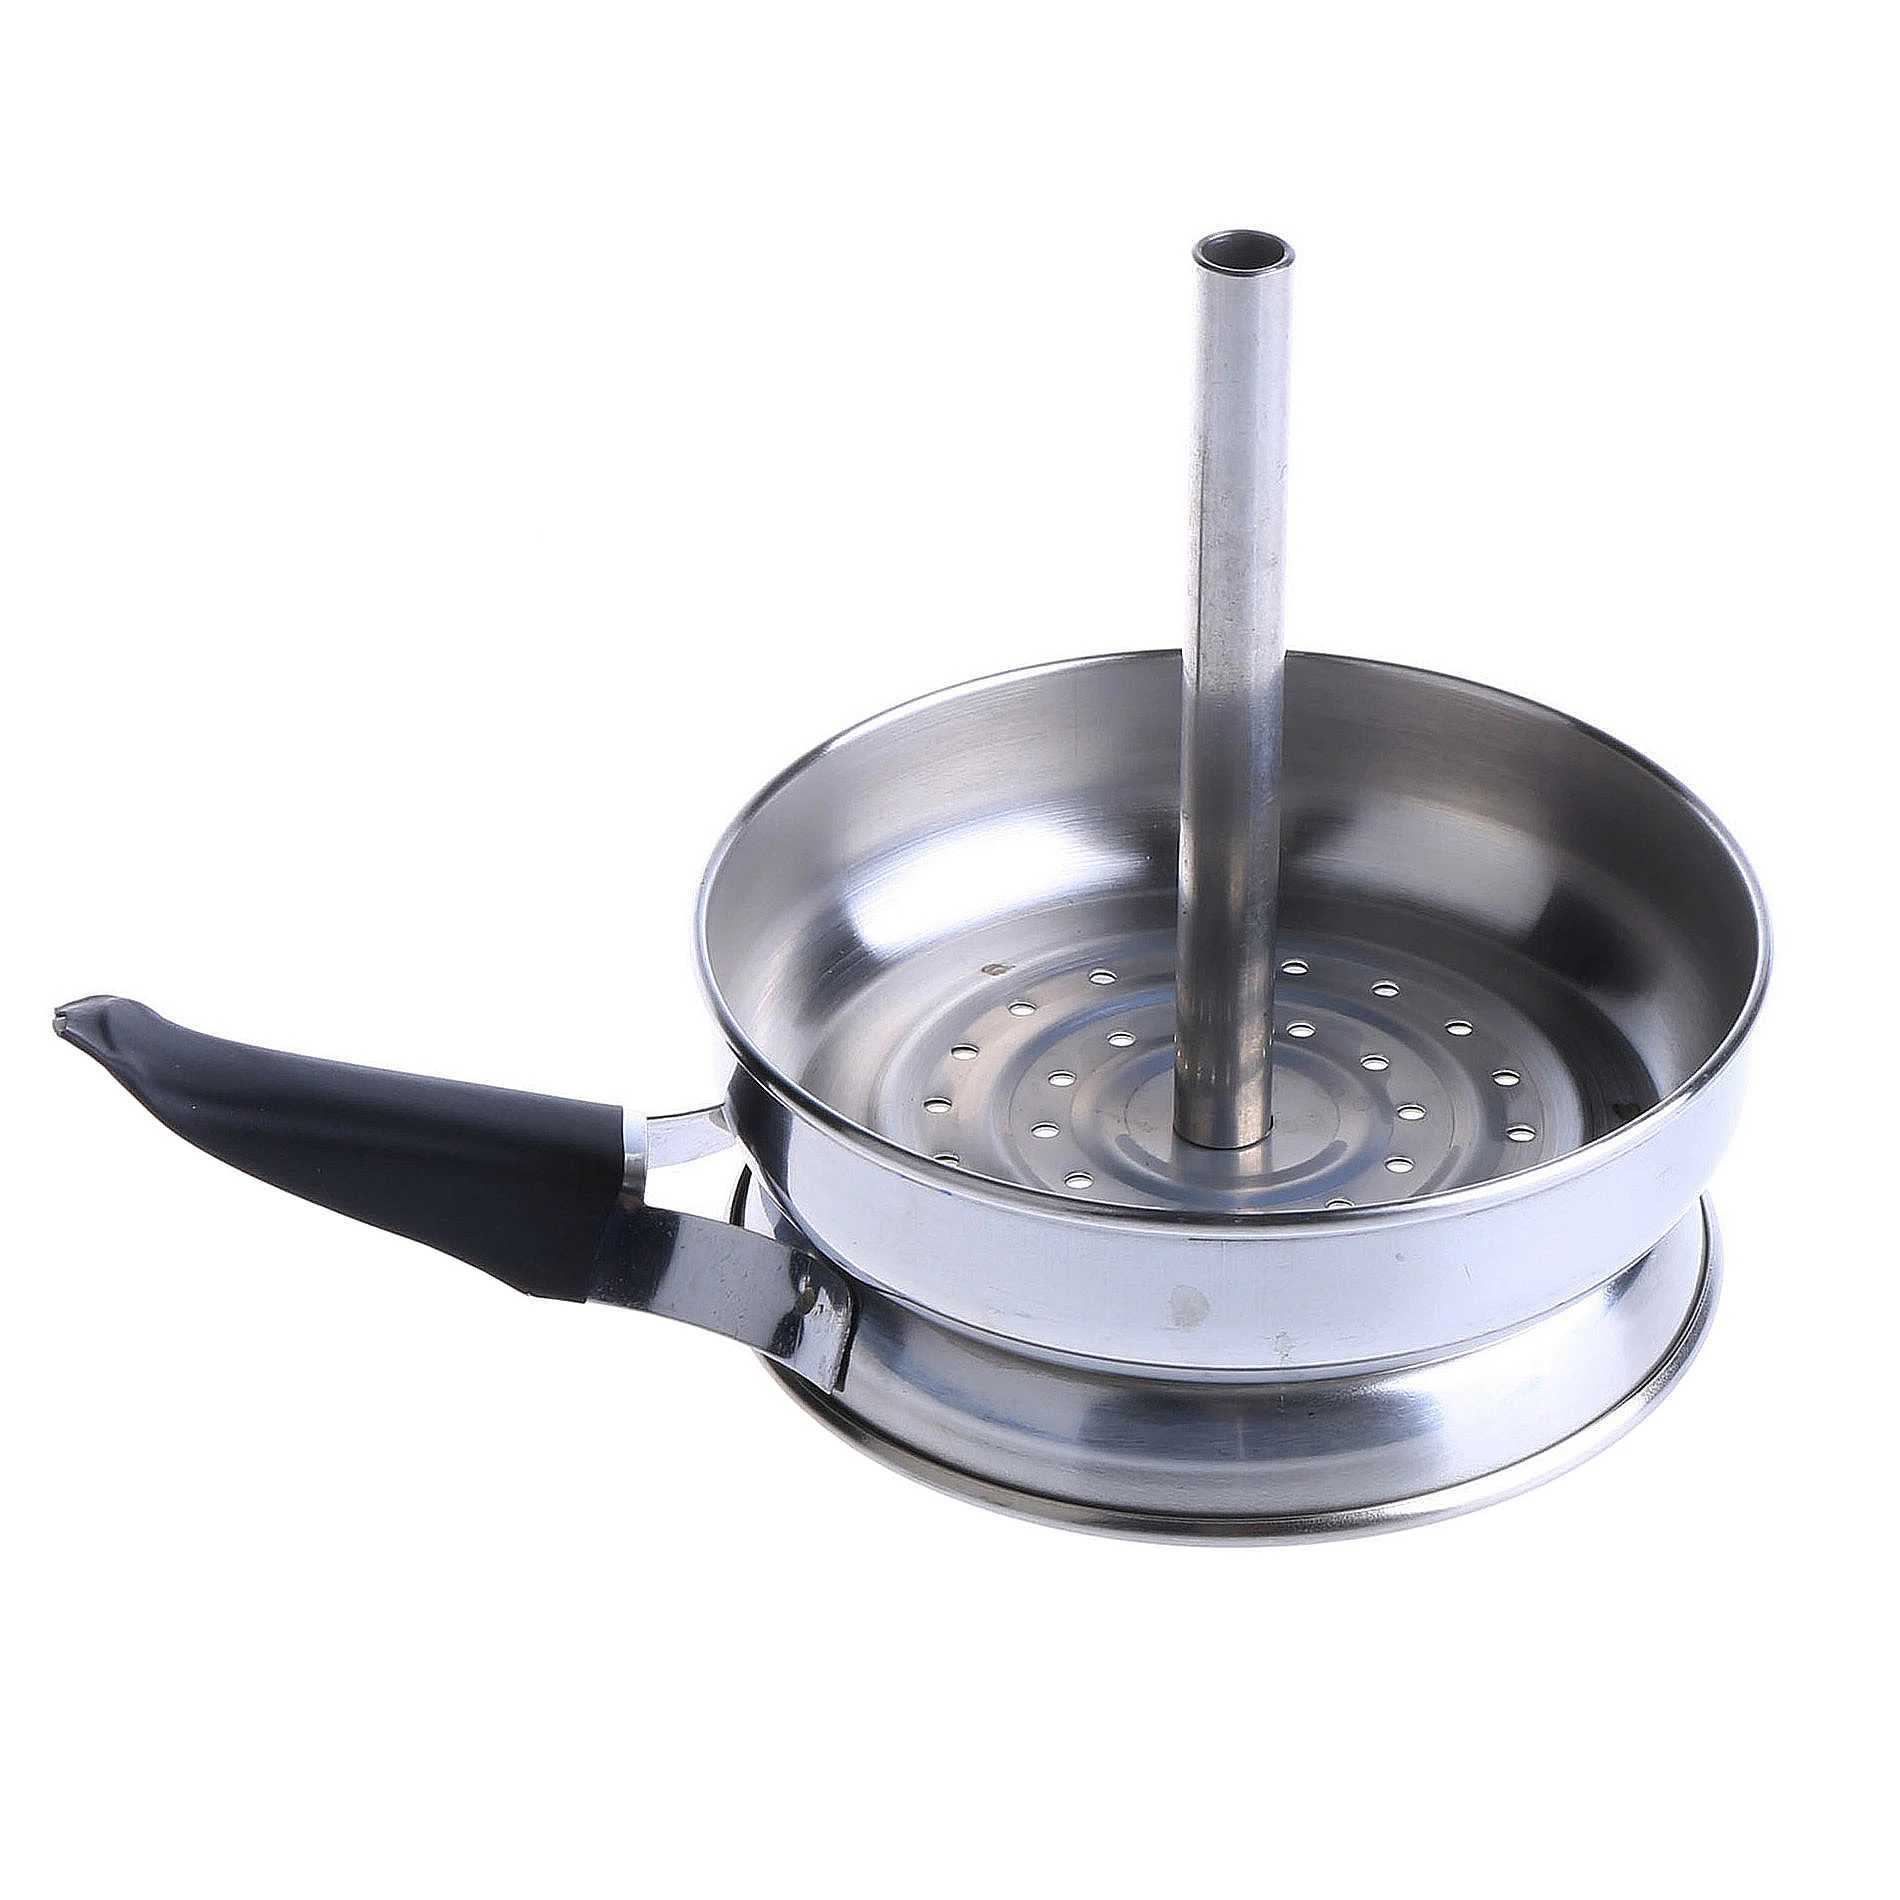 Accessories Stainless Steel Hookah Charcoal Chimney Hookah Bowl Cover Shisha Charcoal Holder Chicha HMDL2403